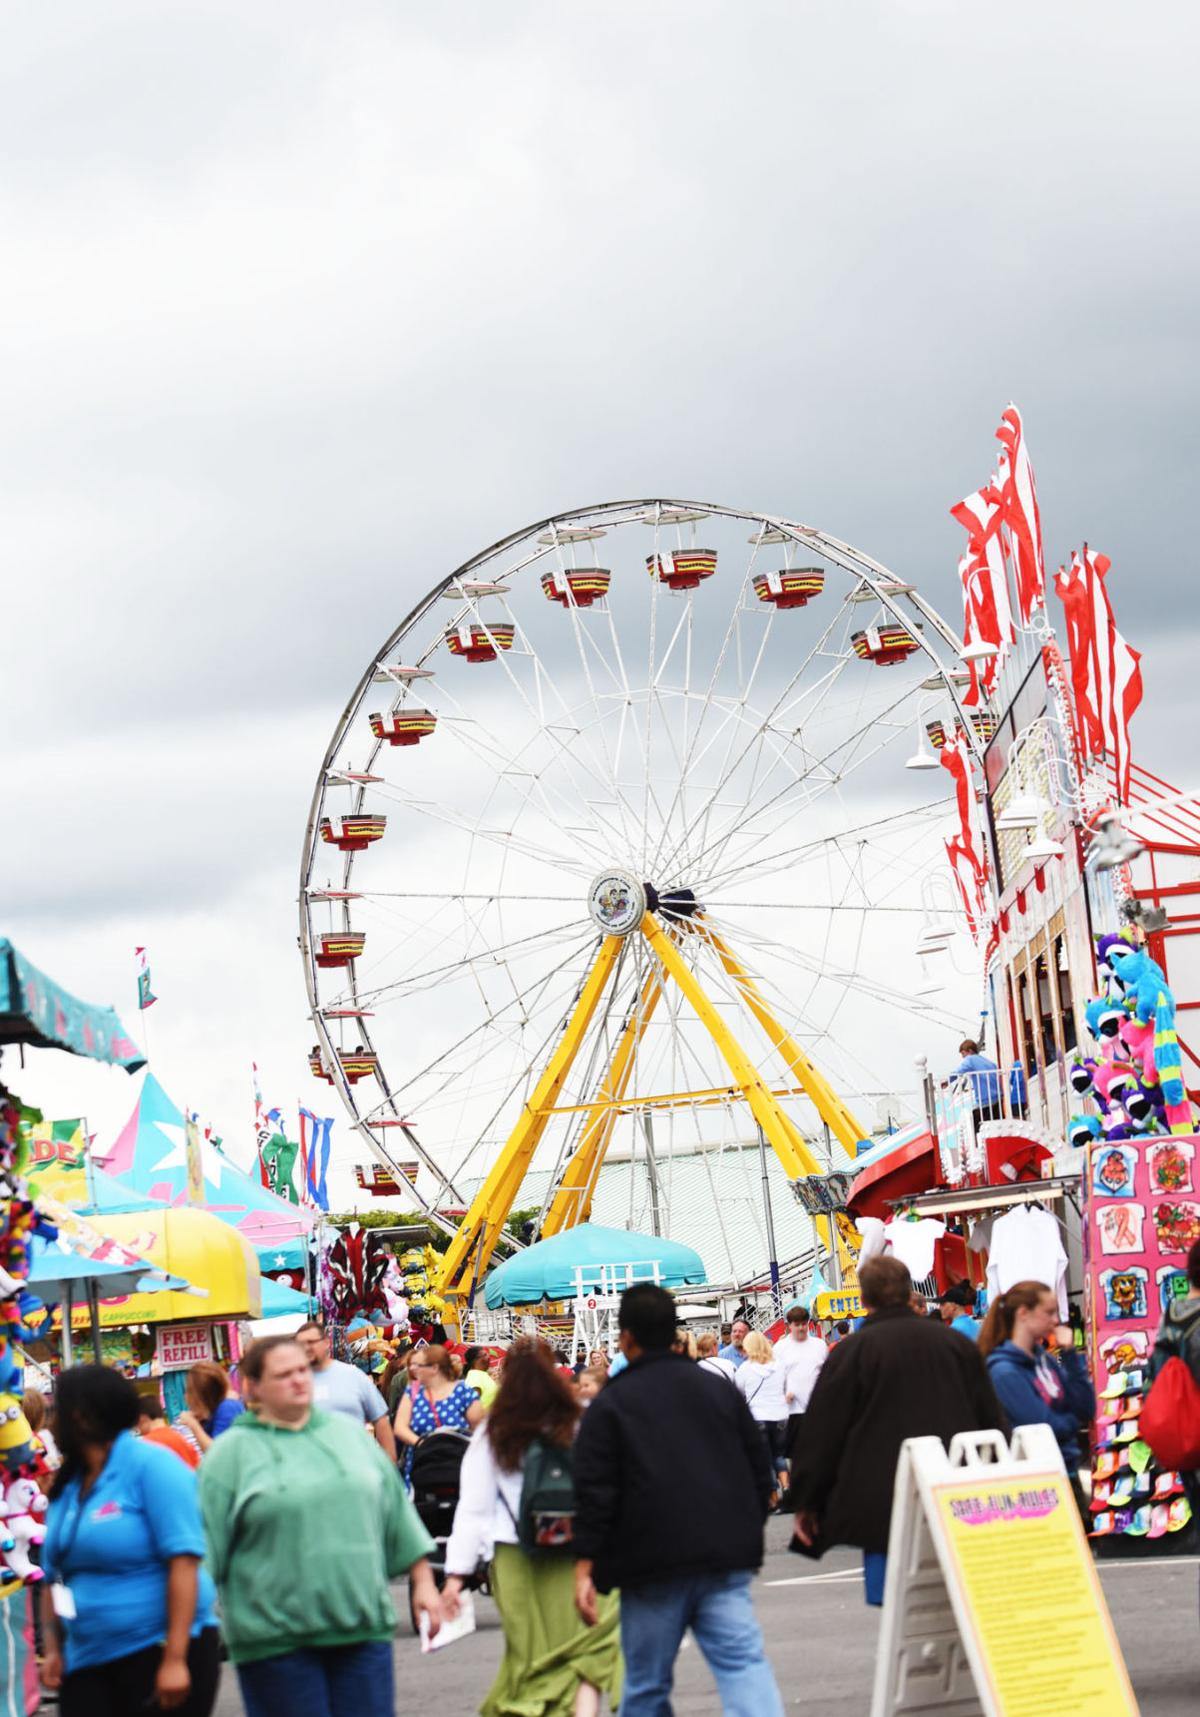 New York State Fair sells more than 20,000 tickets on Cyber Monday | Eye on NY | nrd.kbic-nsn.gov